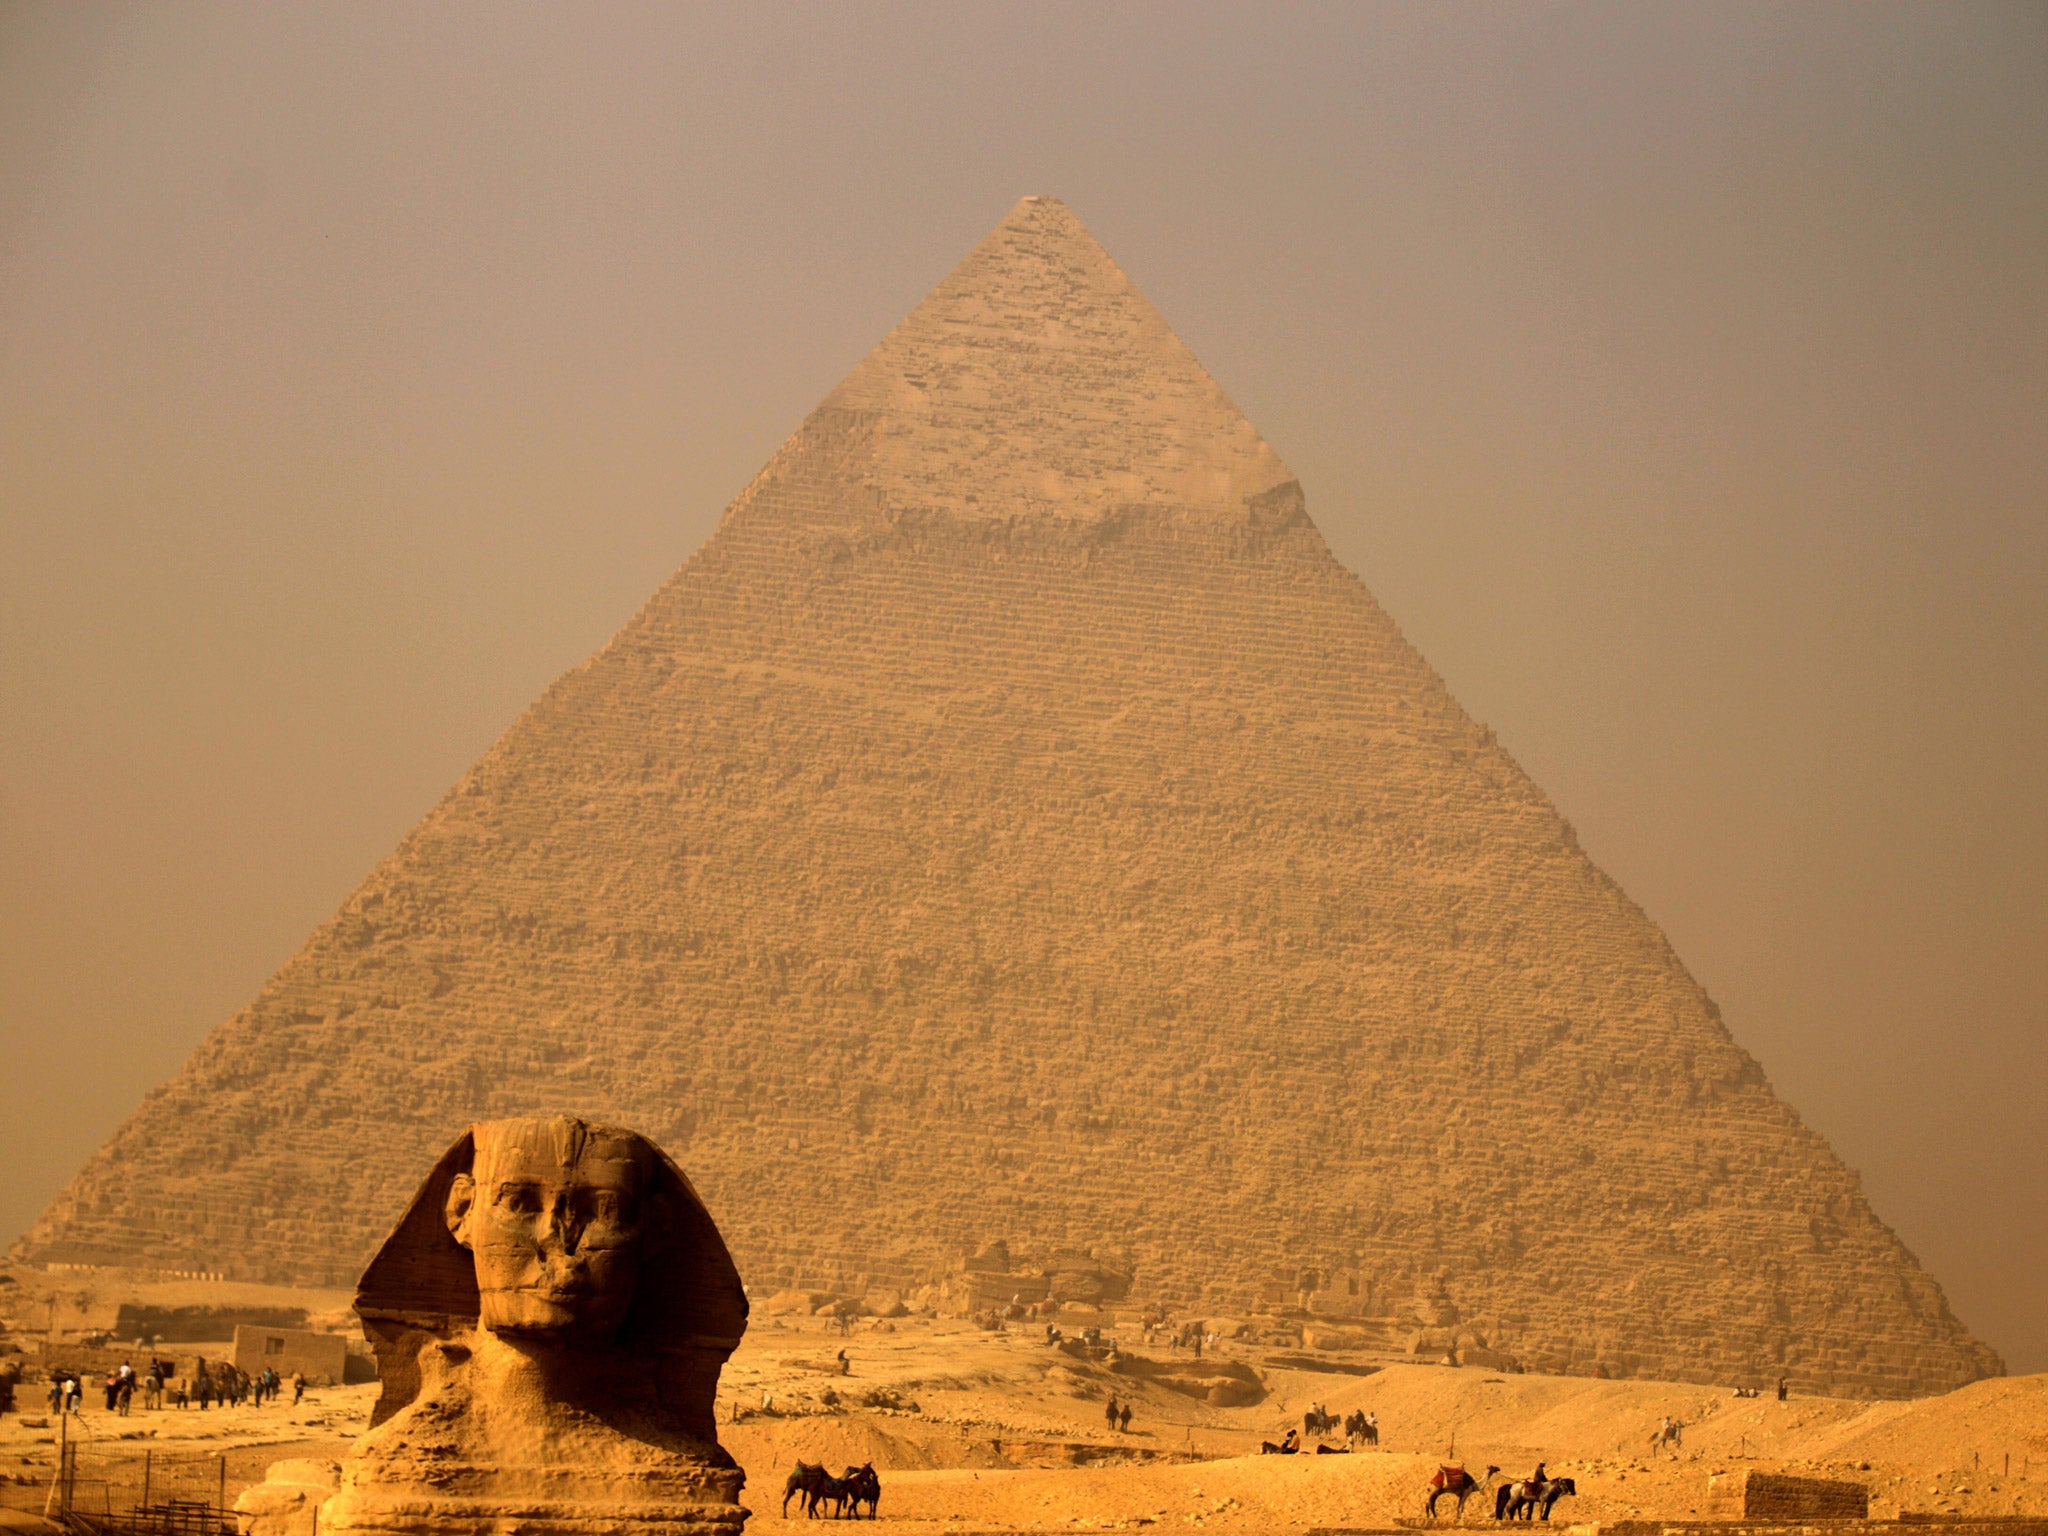 Porn At The Pyramids Investigation After Tourists Make Adult Film At